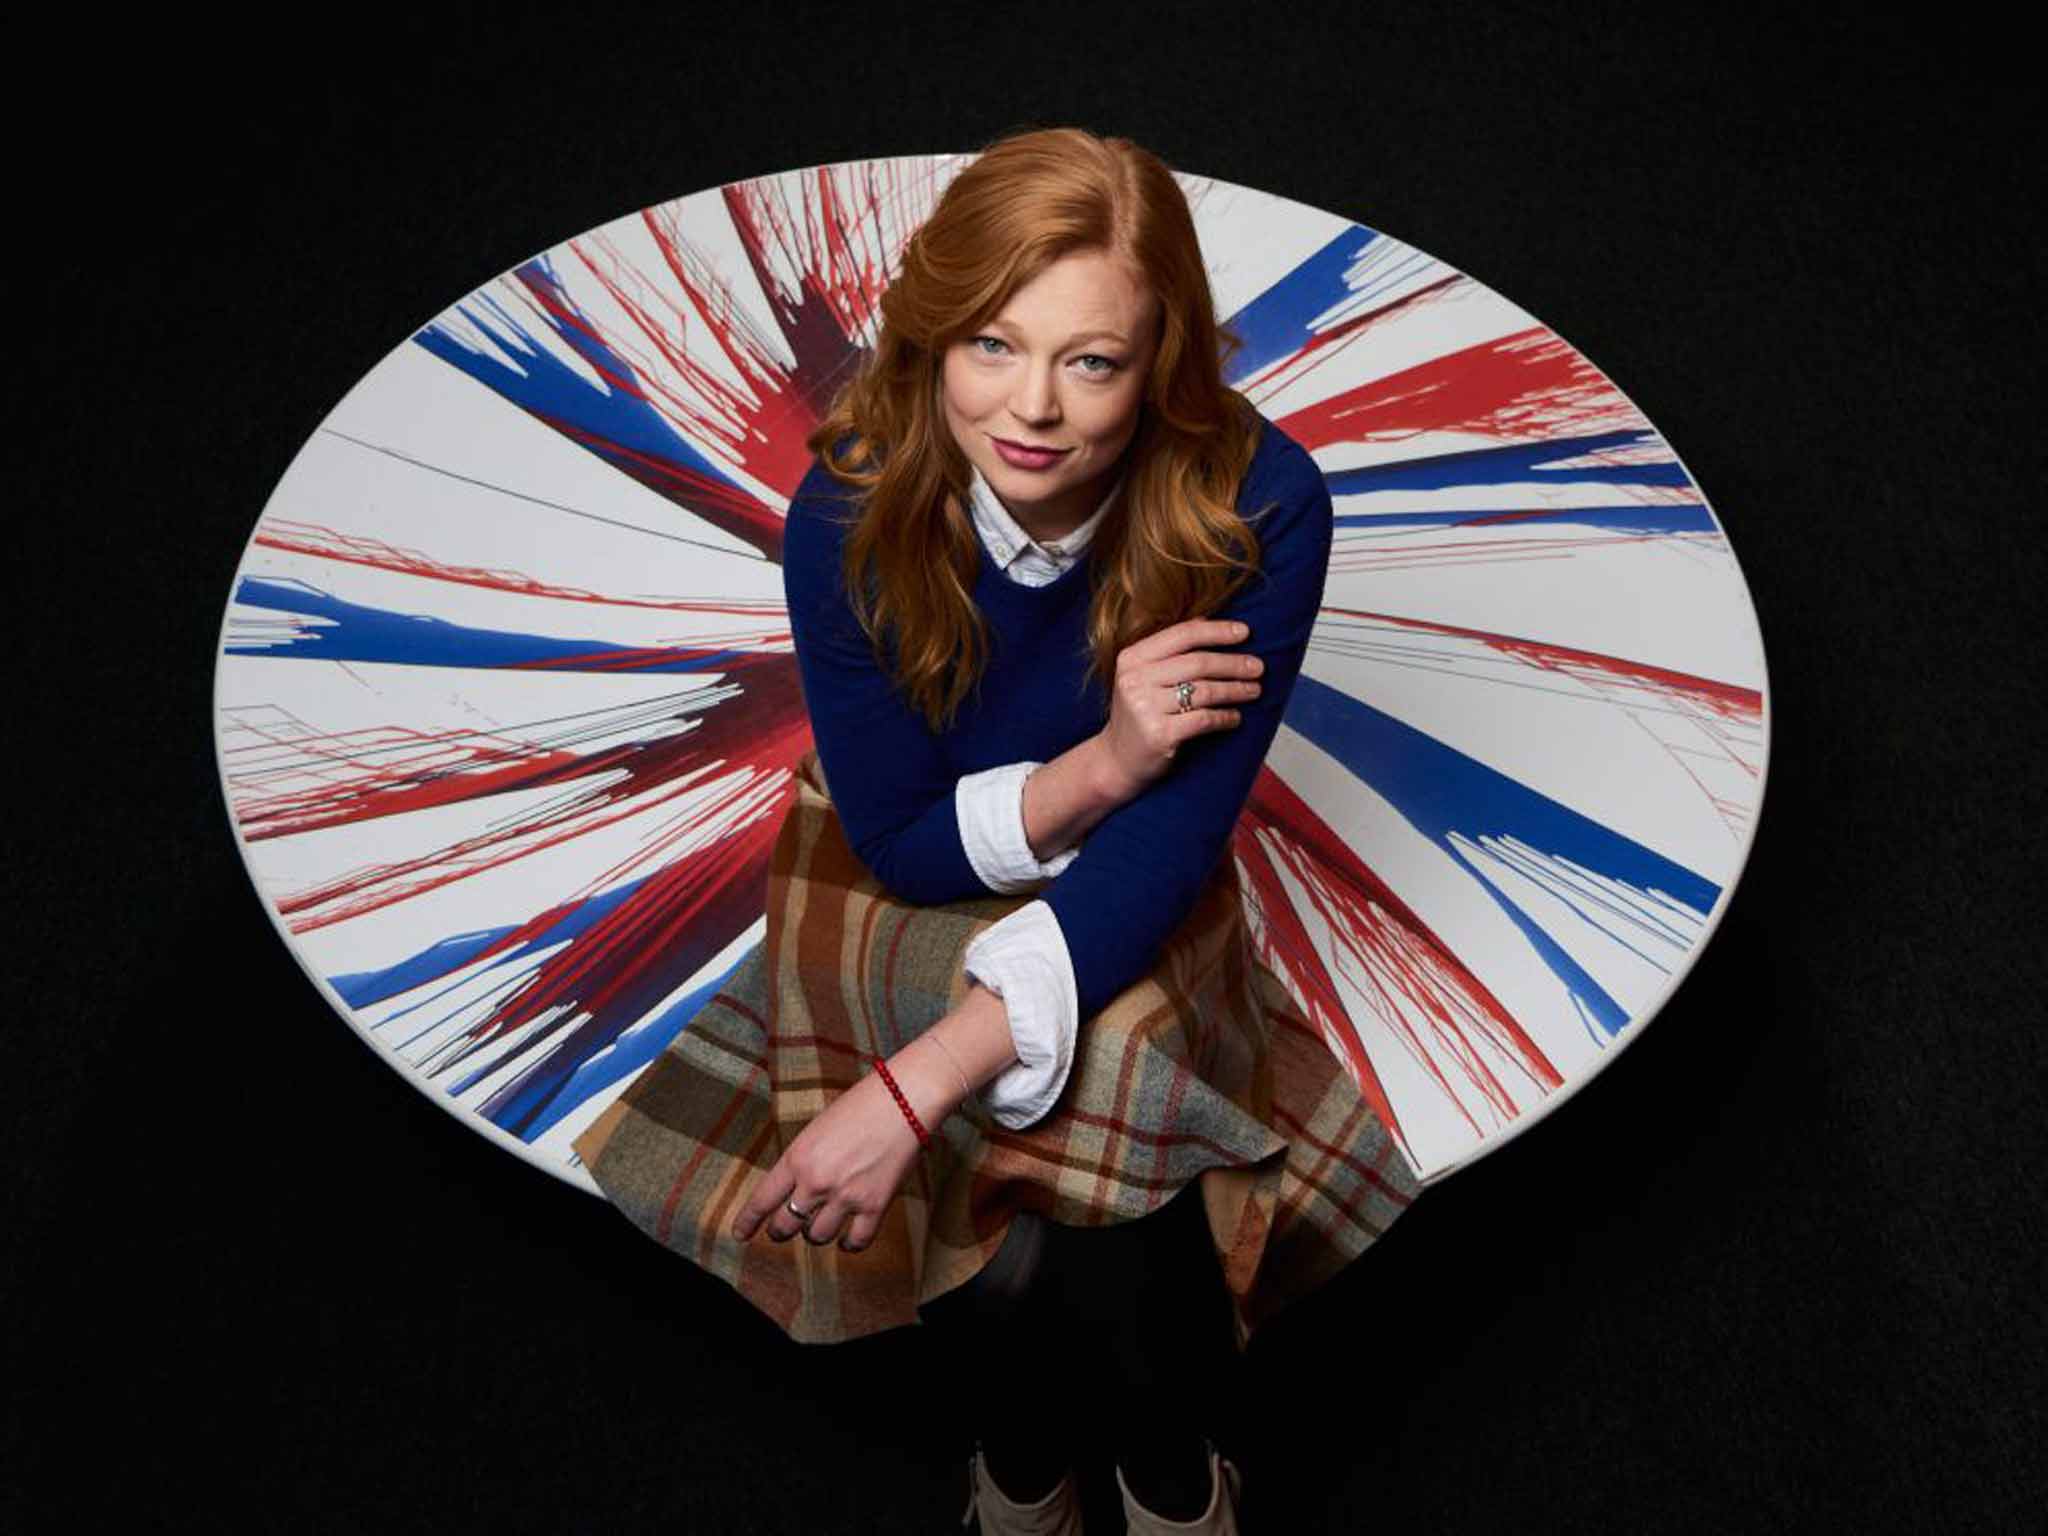 In demand: Australia's Sarah Snook makes her London stage debut in Ibsen's 'The Master Builder'